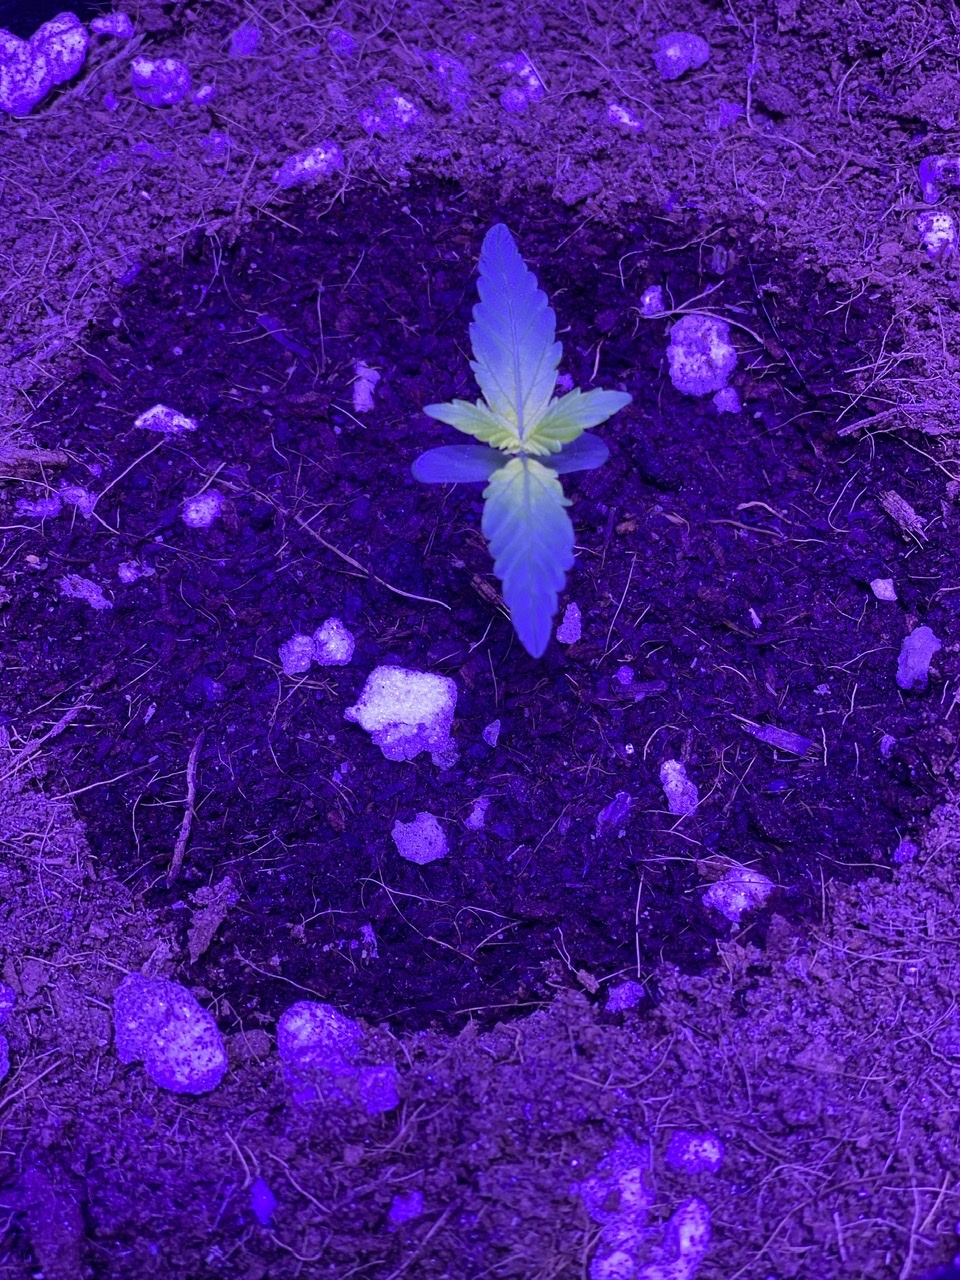 Help need assistance with identifying seedling problem new grower 7